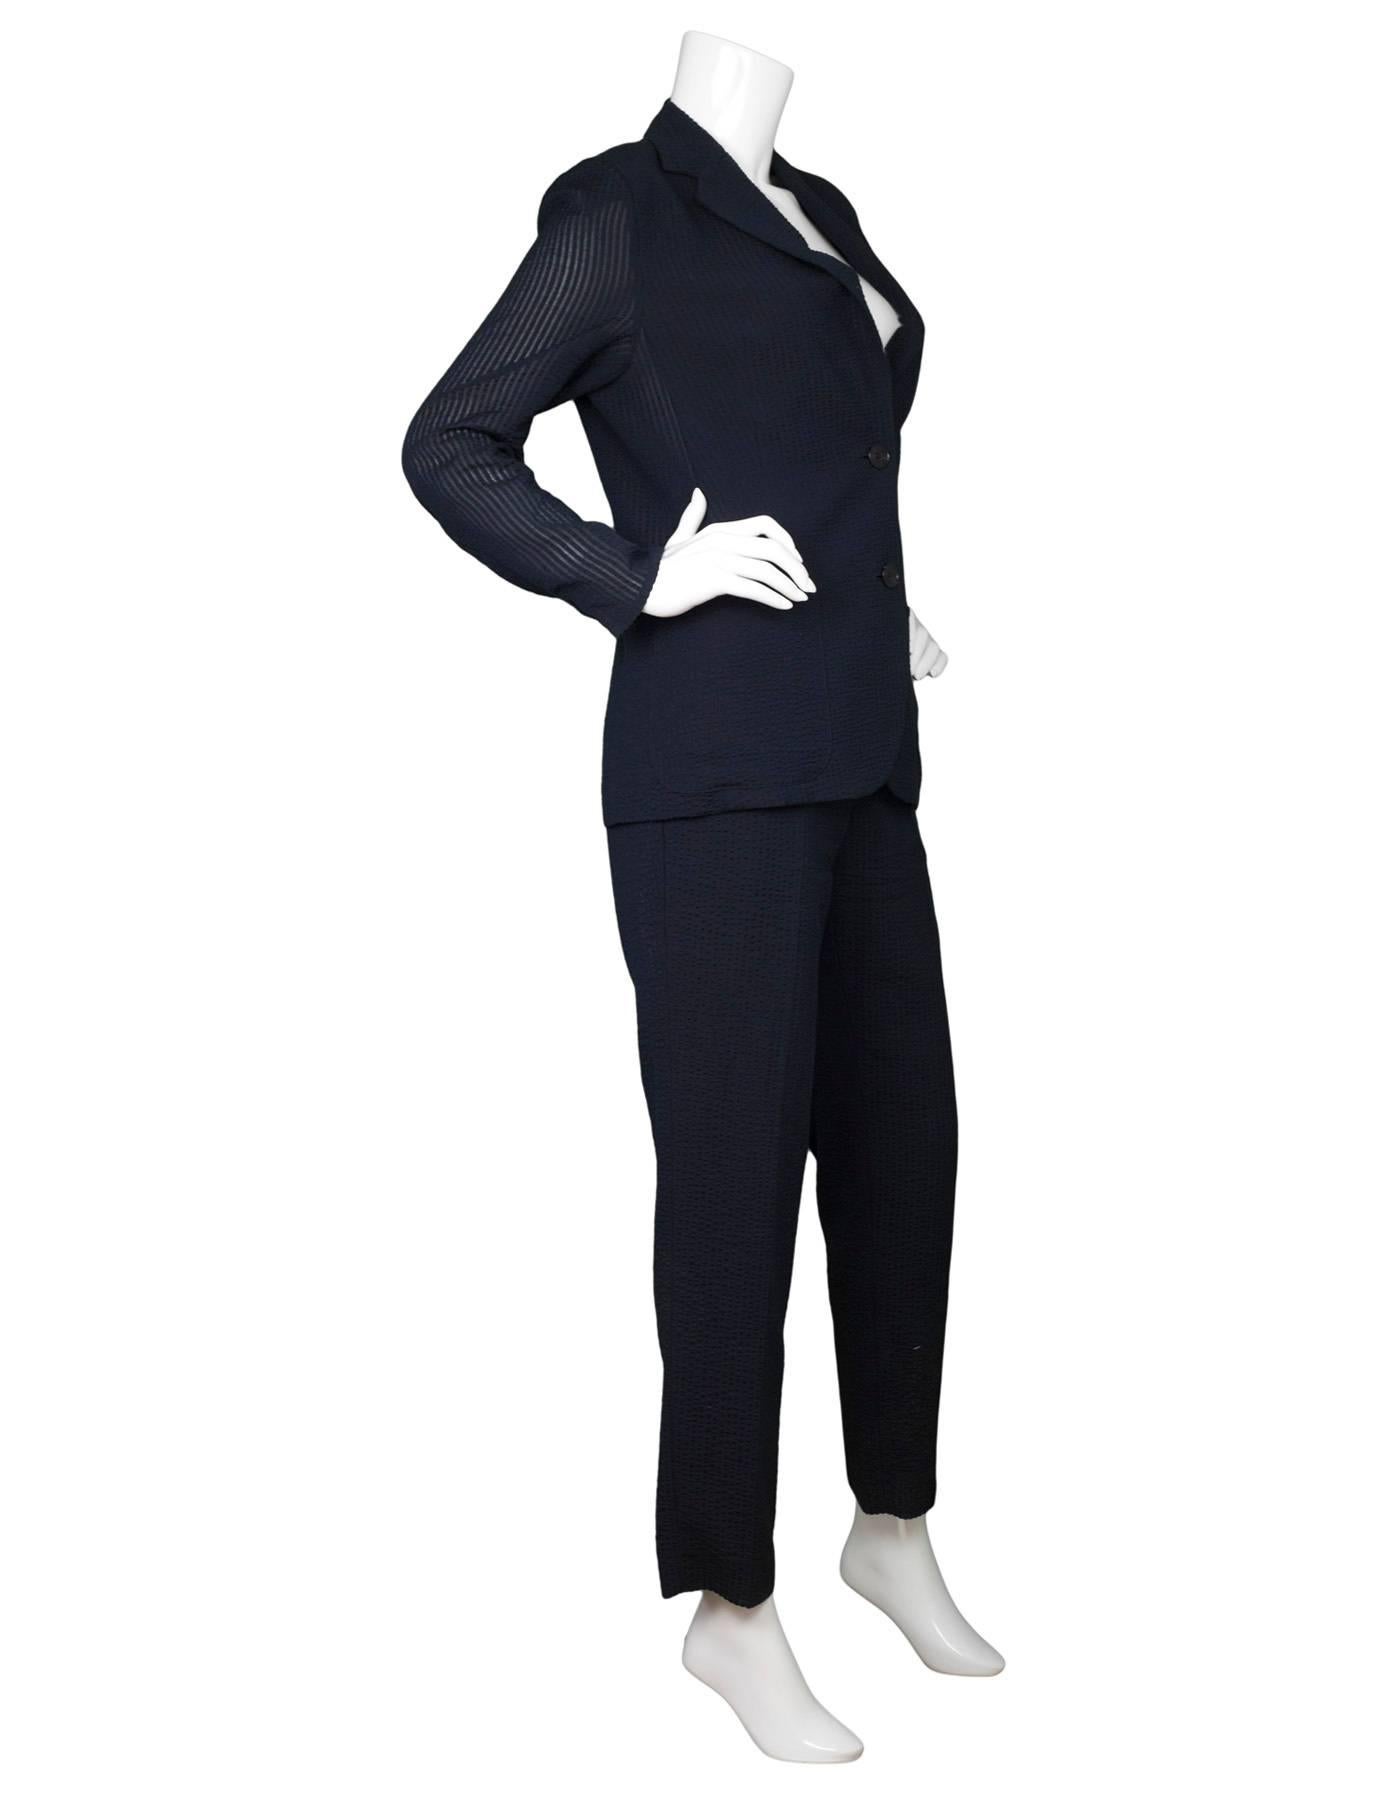 Akris Navy Seersucker Pantsuit Sz 8

Made In: Romania
Color: Navy
Composition: 51% mulberry silk, 39% wool, 7% polyester, 2% nylon, 1% polyurethane
Lining: 100% viscose
Closure/Opening: Jacket: front double button / Pants: front zip and hidden hook